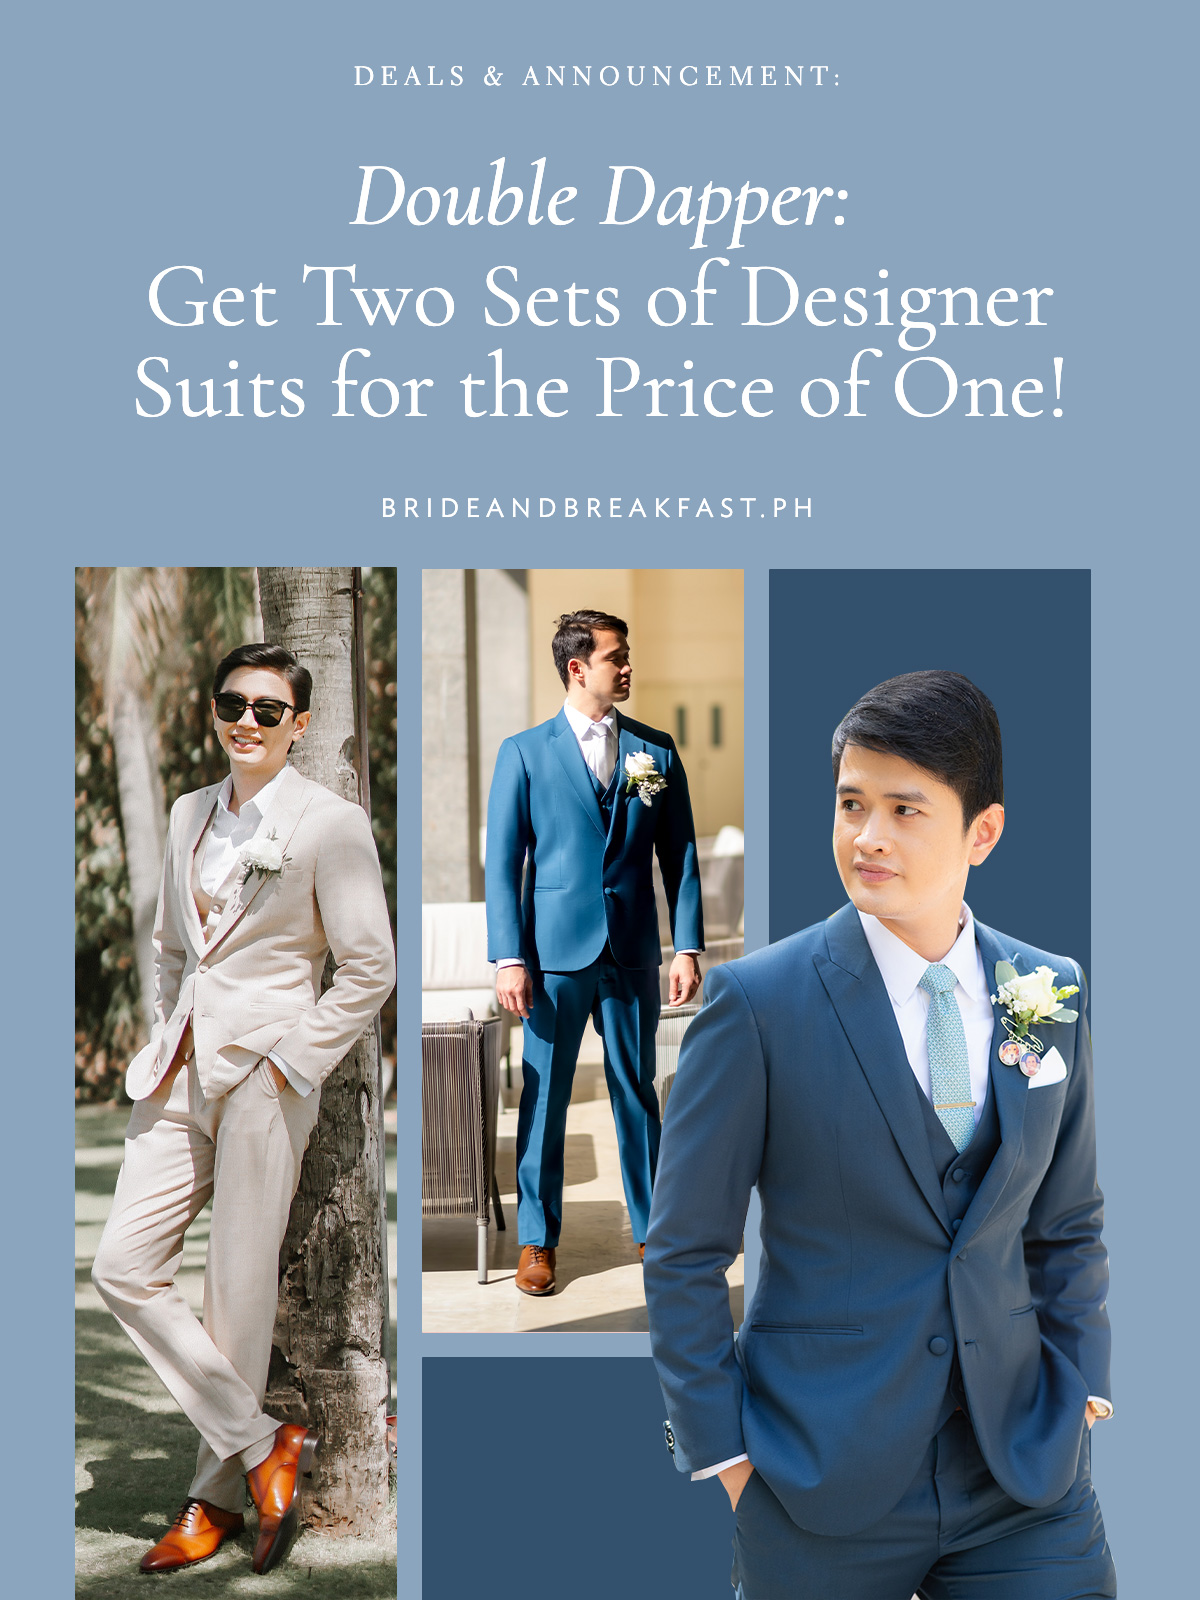 Double Dapper: Get Two Sets of Designer Suits for the Price of One!